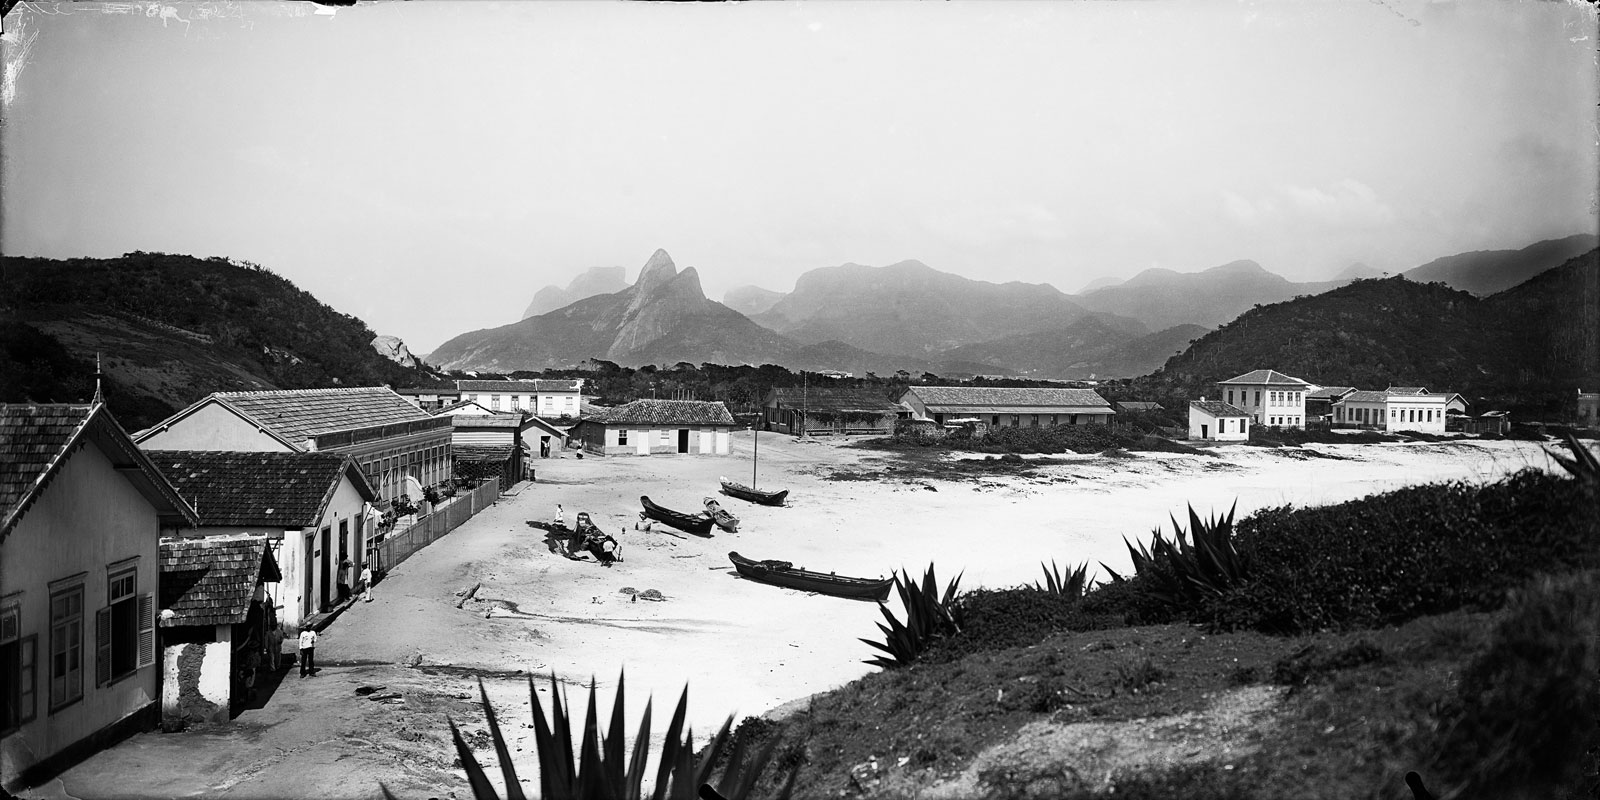 Copacabana, with Dois Irmãos Hill in the background, circa 1865